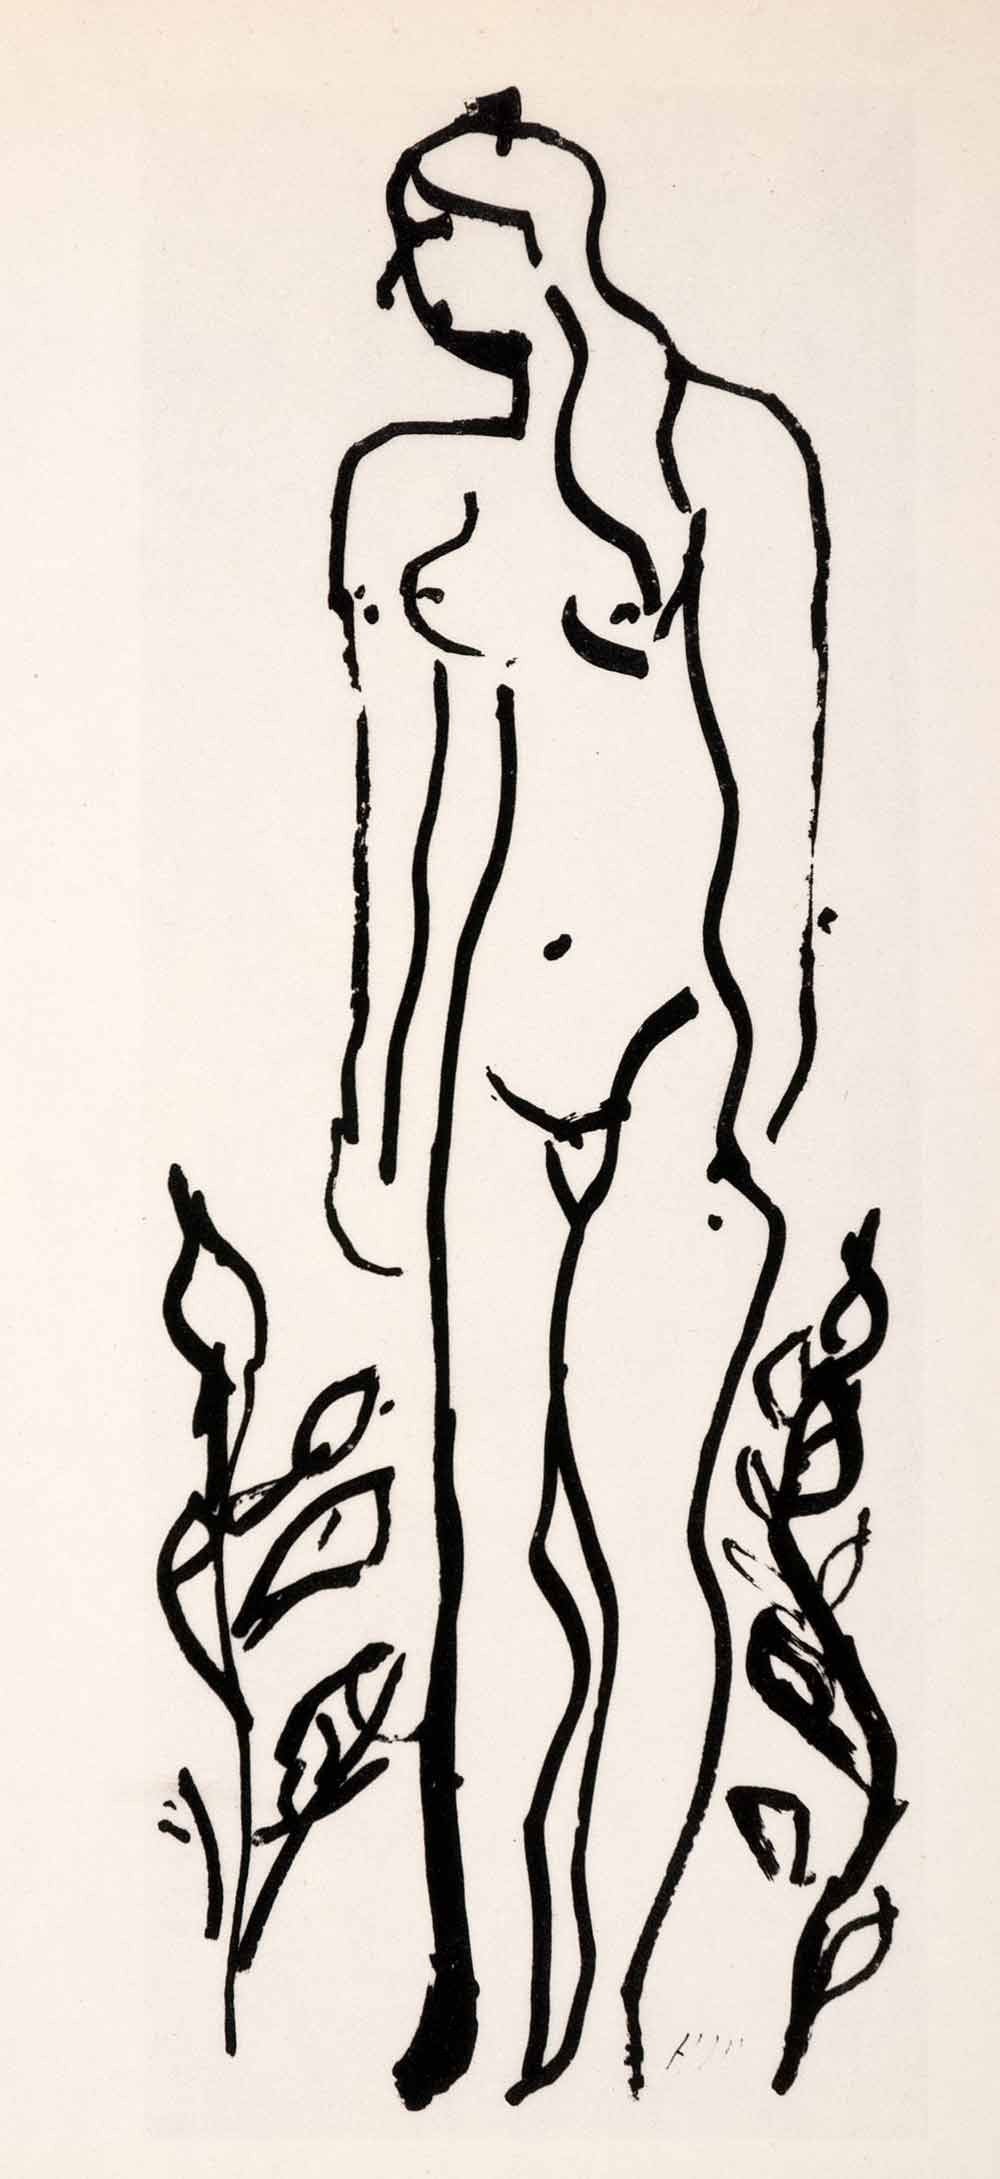 1969 Photolithograph Henri Matisse Art Nude in the Bushes Woman Female Sketch